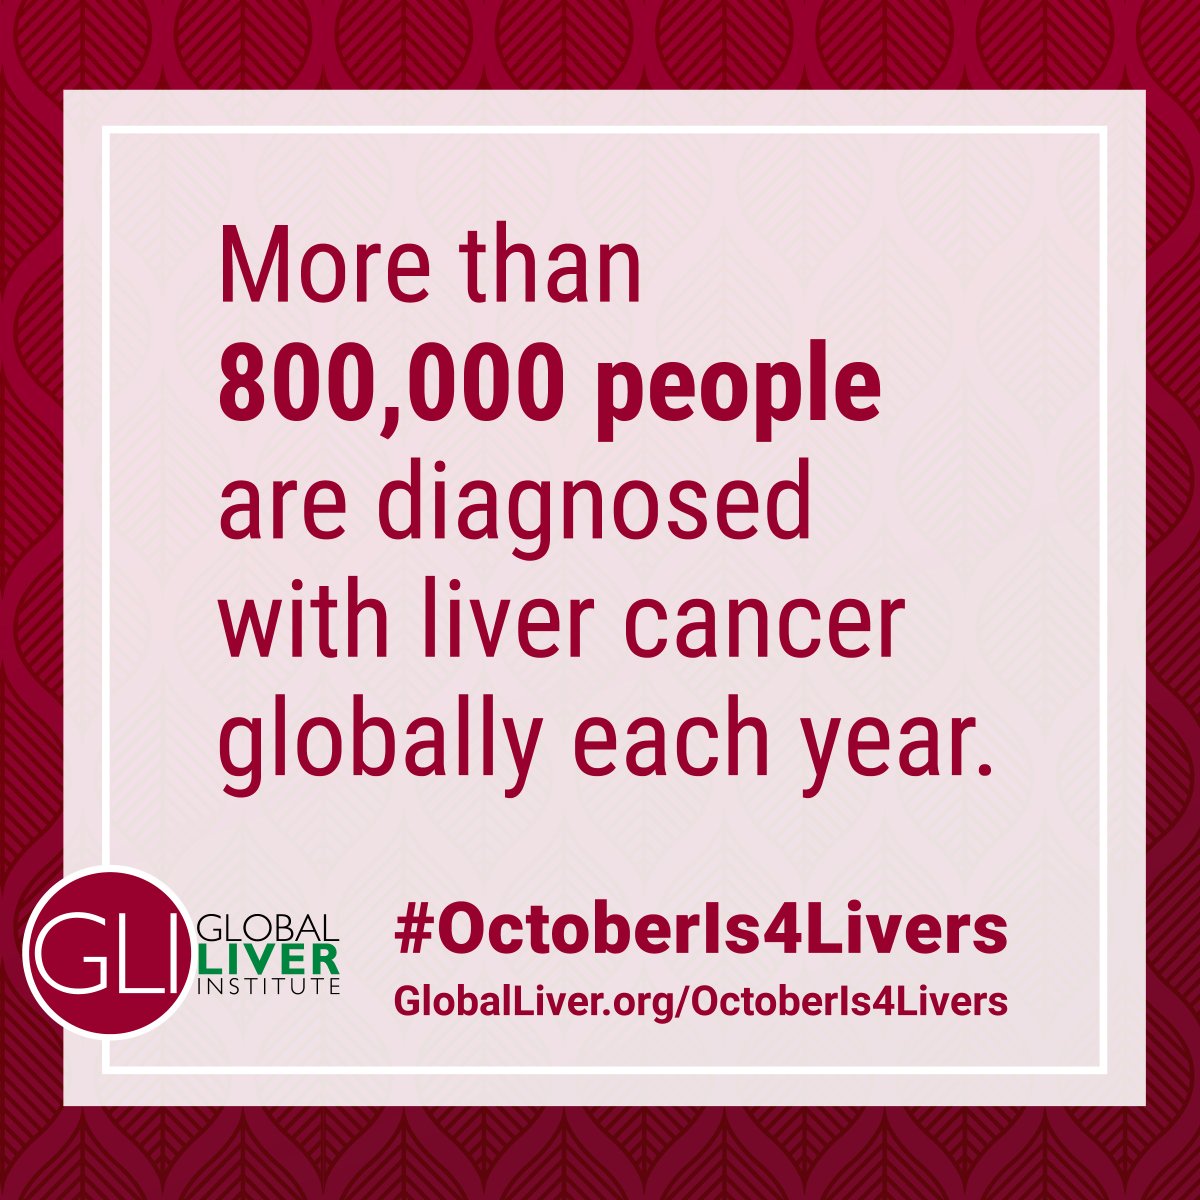 Fortunately, when diagnosed at an early stage, #cancers of the #liver can be treated effectively. #Octoberis4Livers #LiverCancerAwarenessMonth 

Learn more about #livercancers by visiting: globalliver.org/liver-cancer